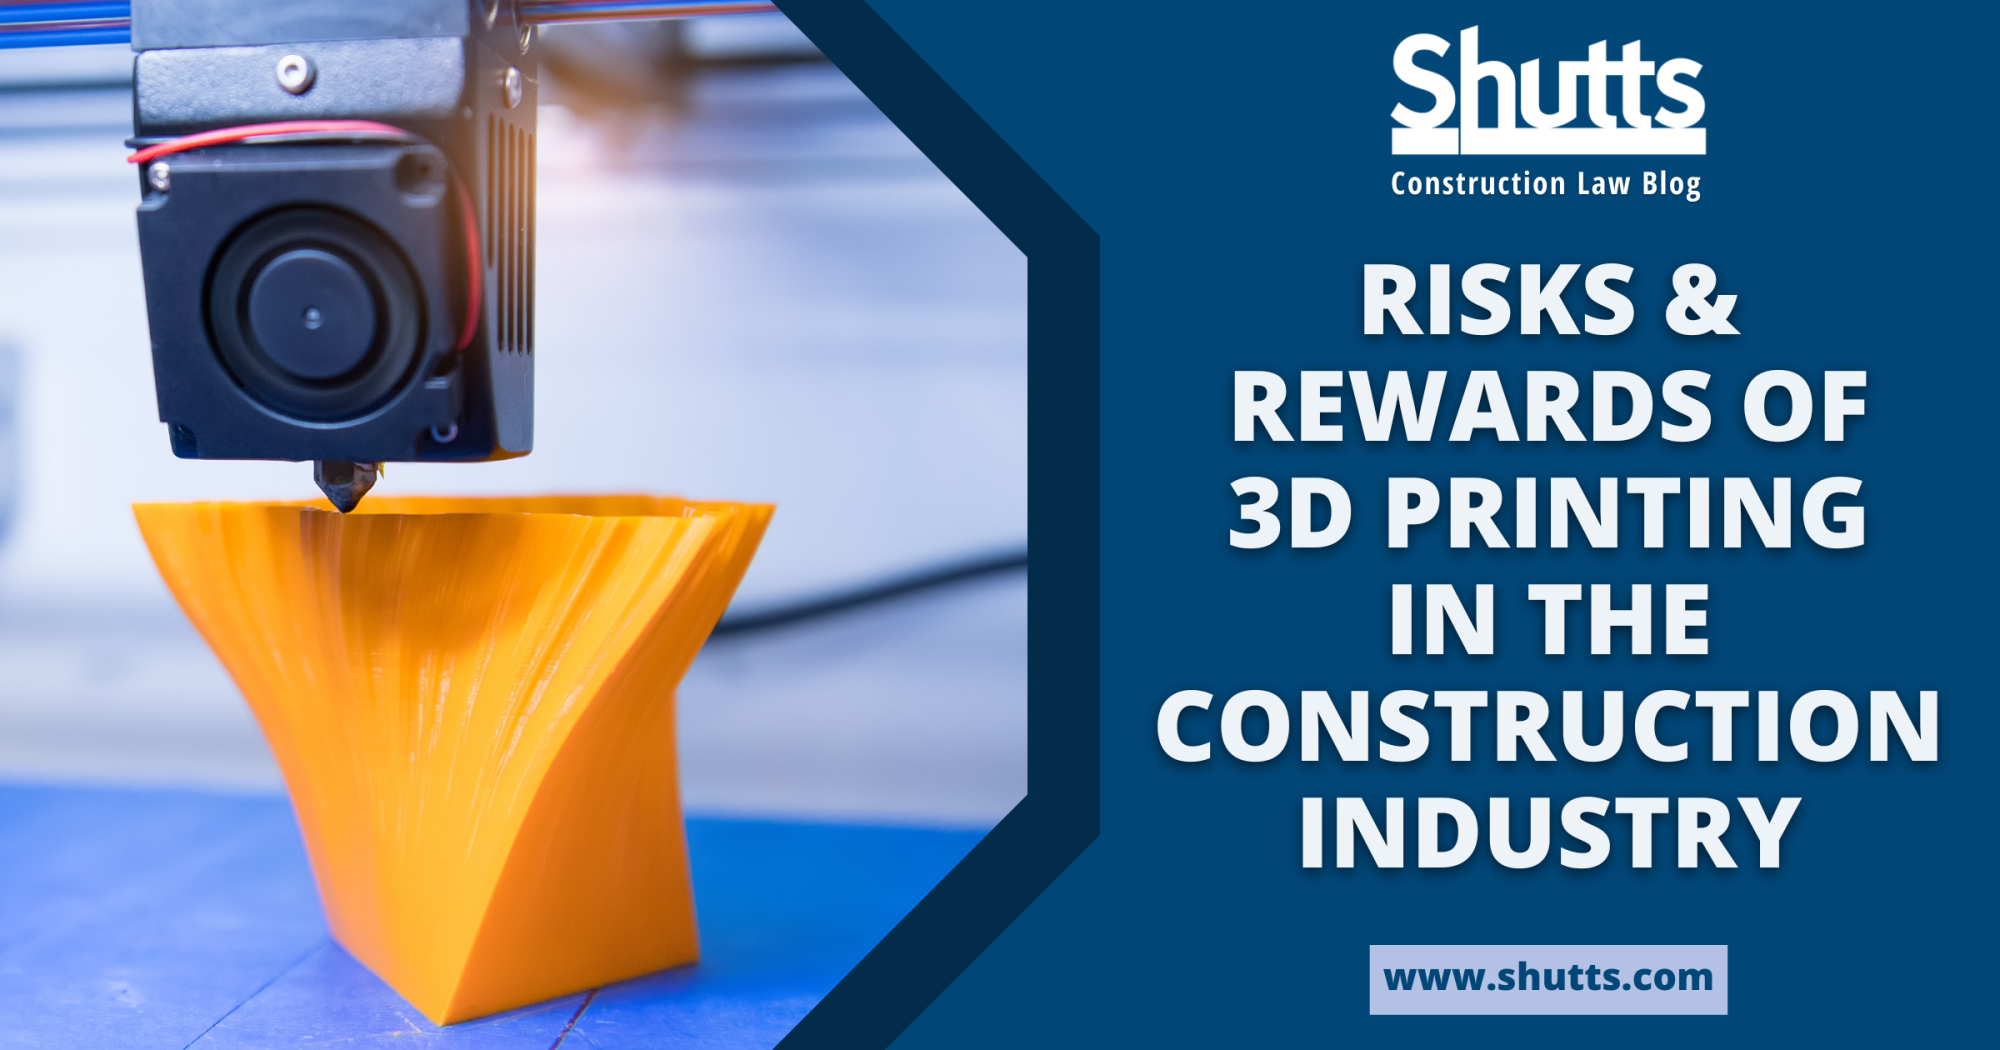 Risks & Rewards of 3D Printing in the Construction Industry